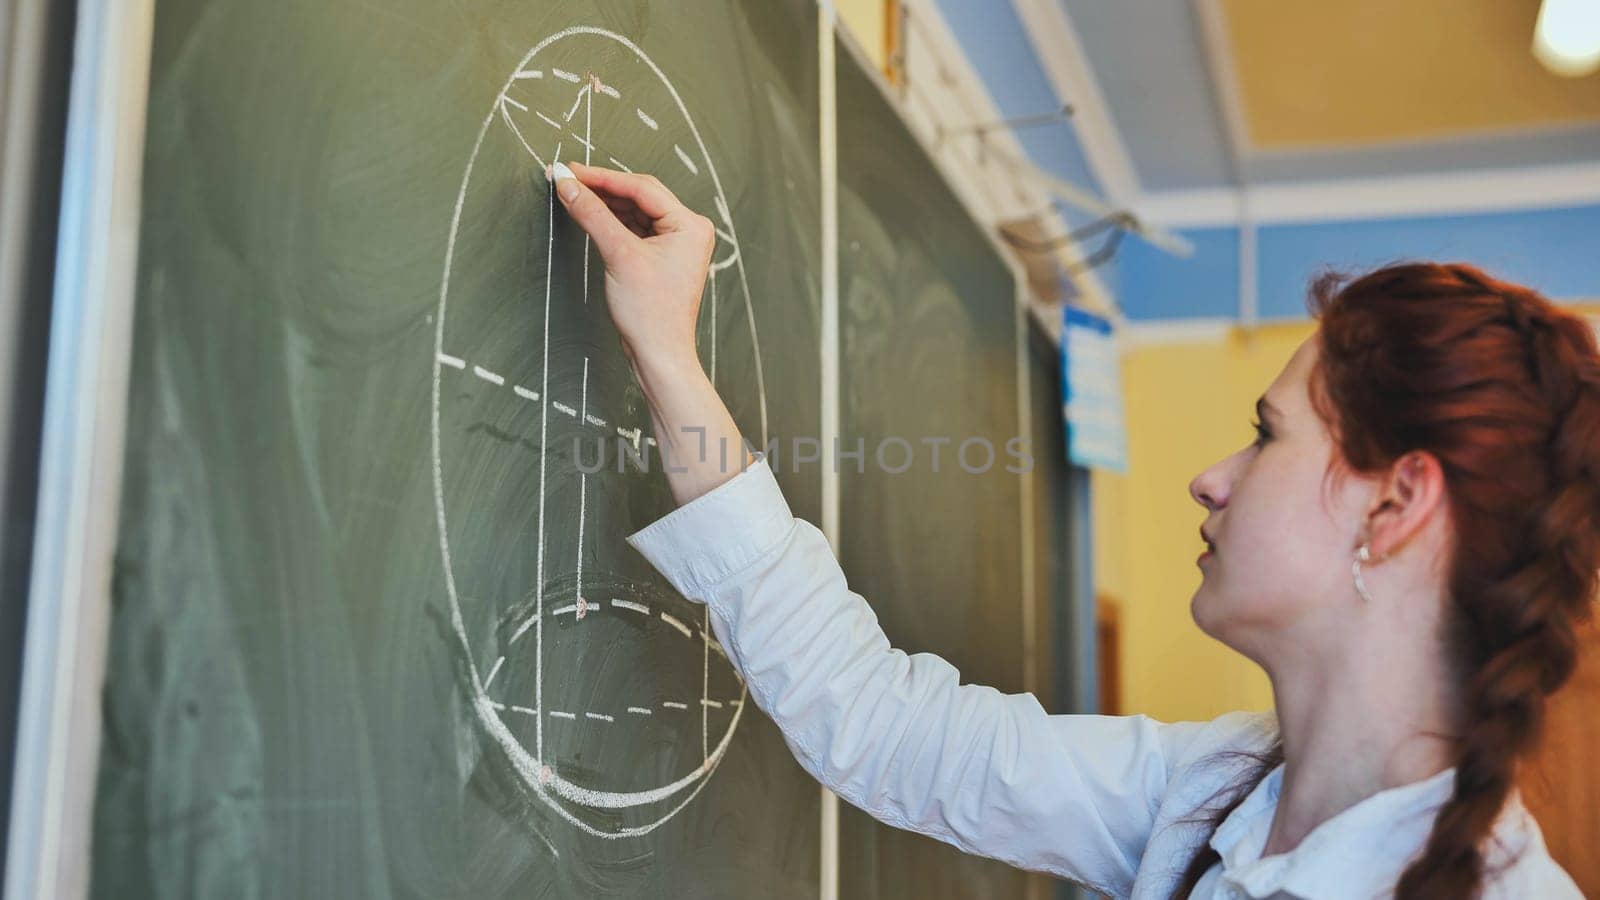 A red-haired schoolgirl draws geometric shapes on the board